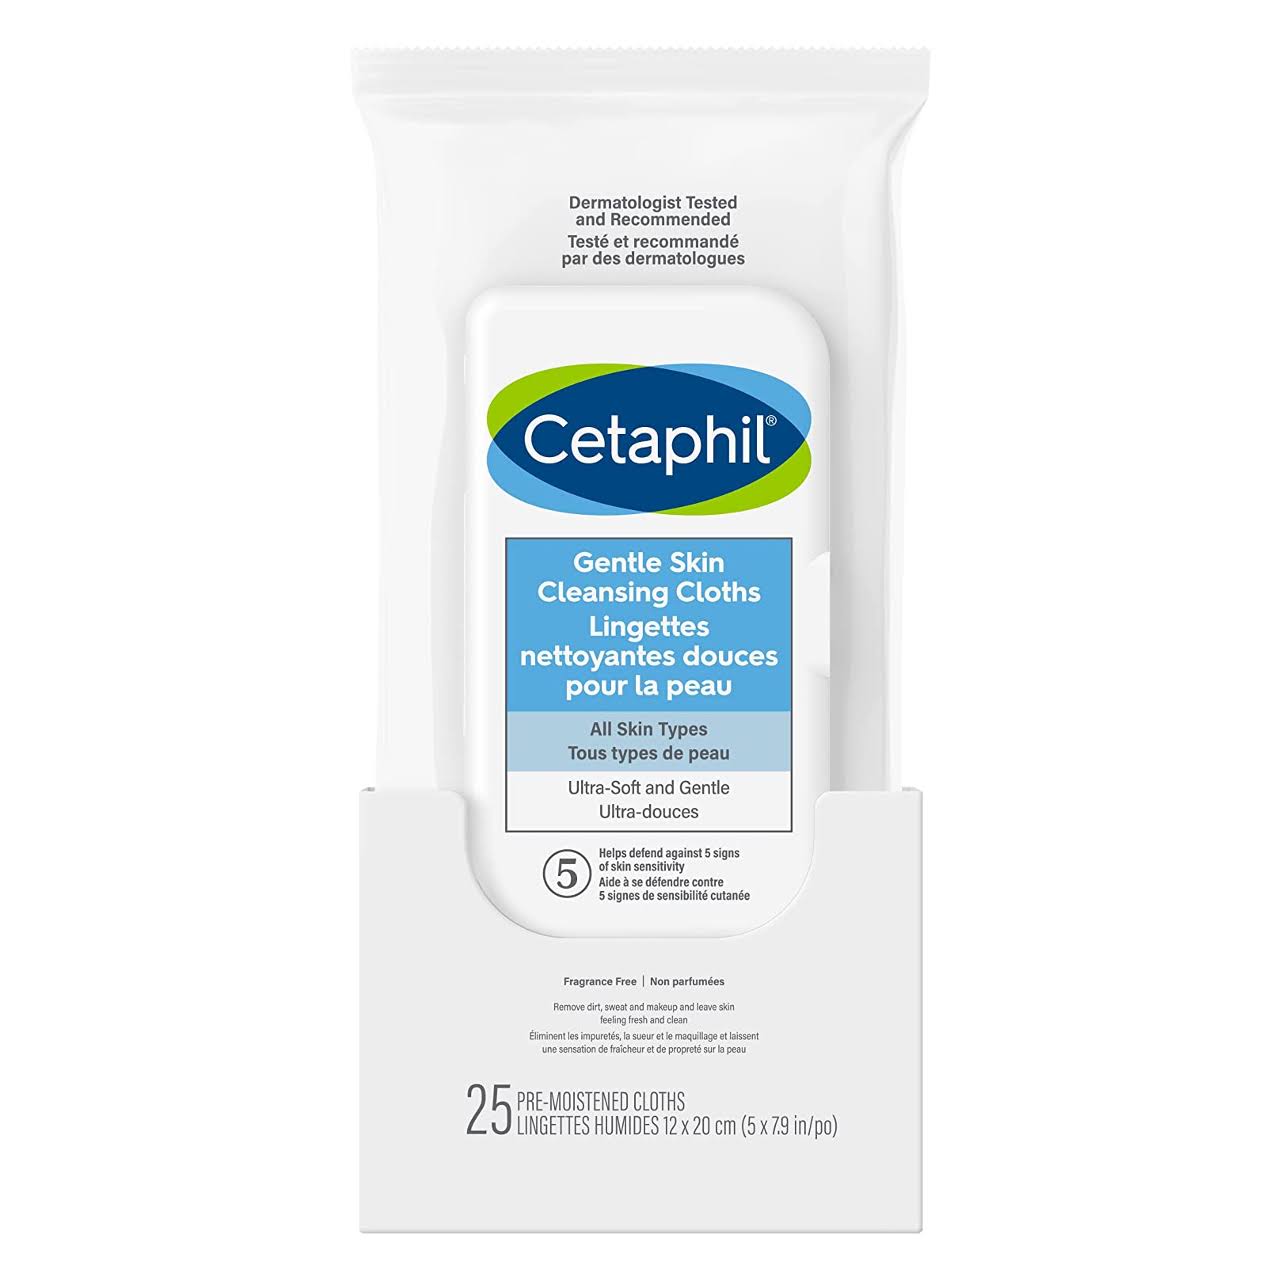 Cetaphil Gentle Skin Cleansing Cloths - Face and Body Wipes